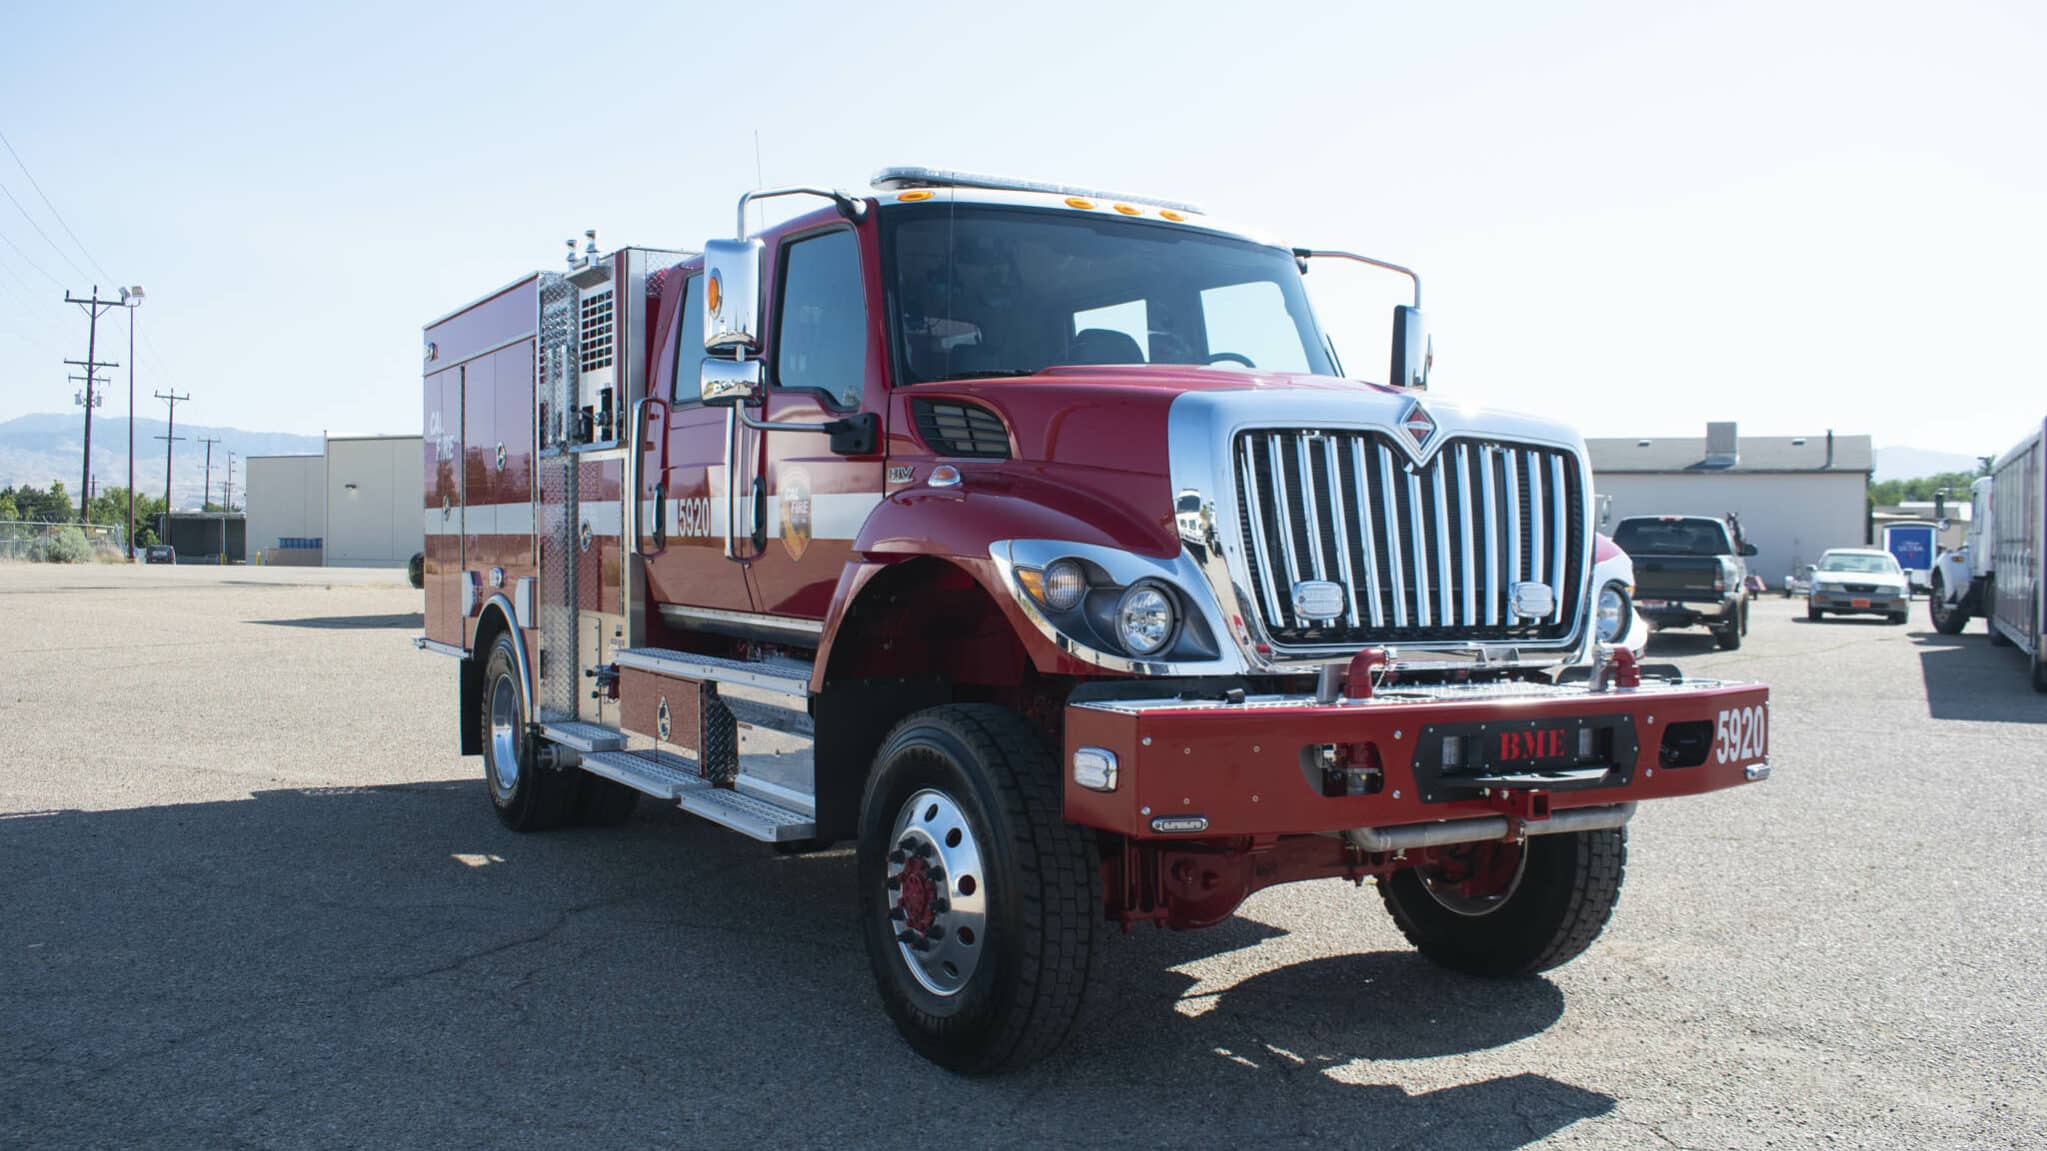 bme delivery 2021 type 3 (model 34) cal fire august 1